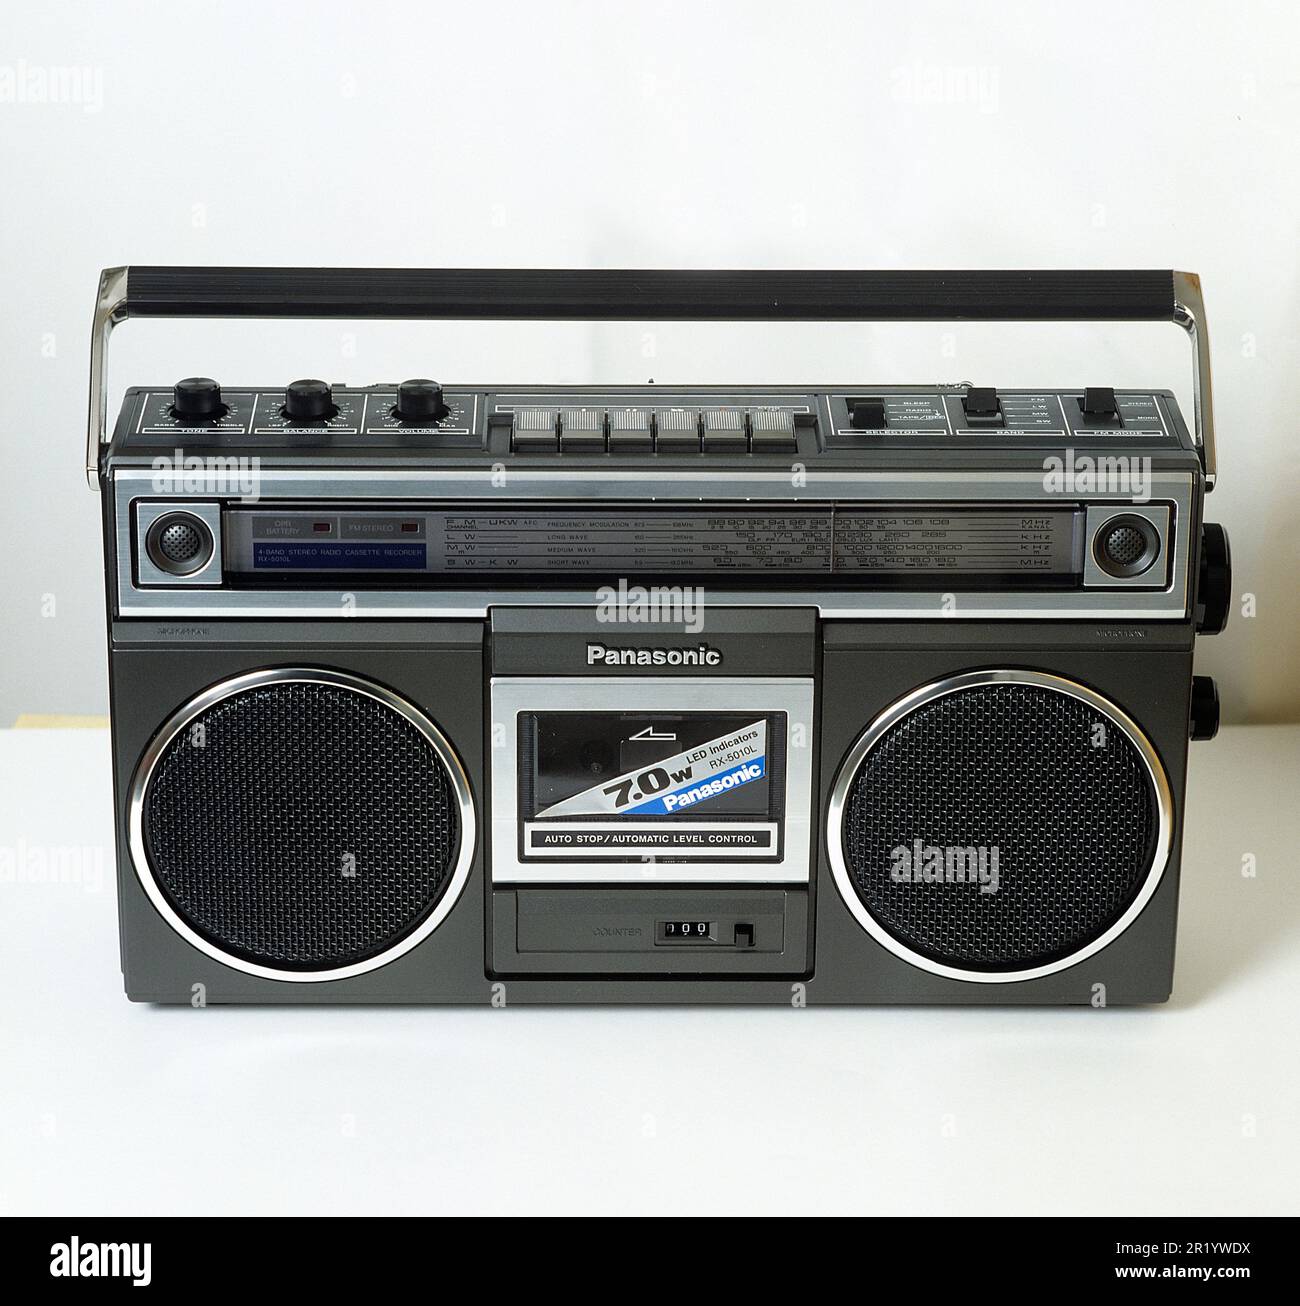 In the 1980s, this type of tape recorder was popular, and the bigger the better. A popular name for the device was the ghetto blaster. Here a Panasonic stereo tape recorder for cassette tapes and radio on a picture from the 1980s. BV72-7 Stock Photo